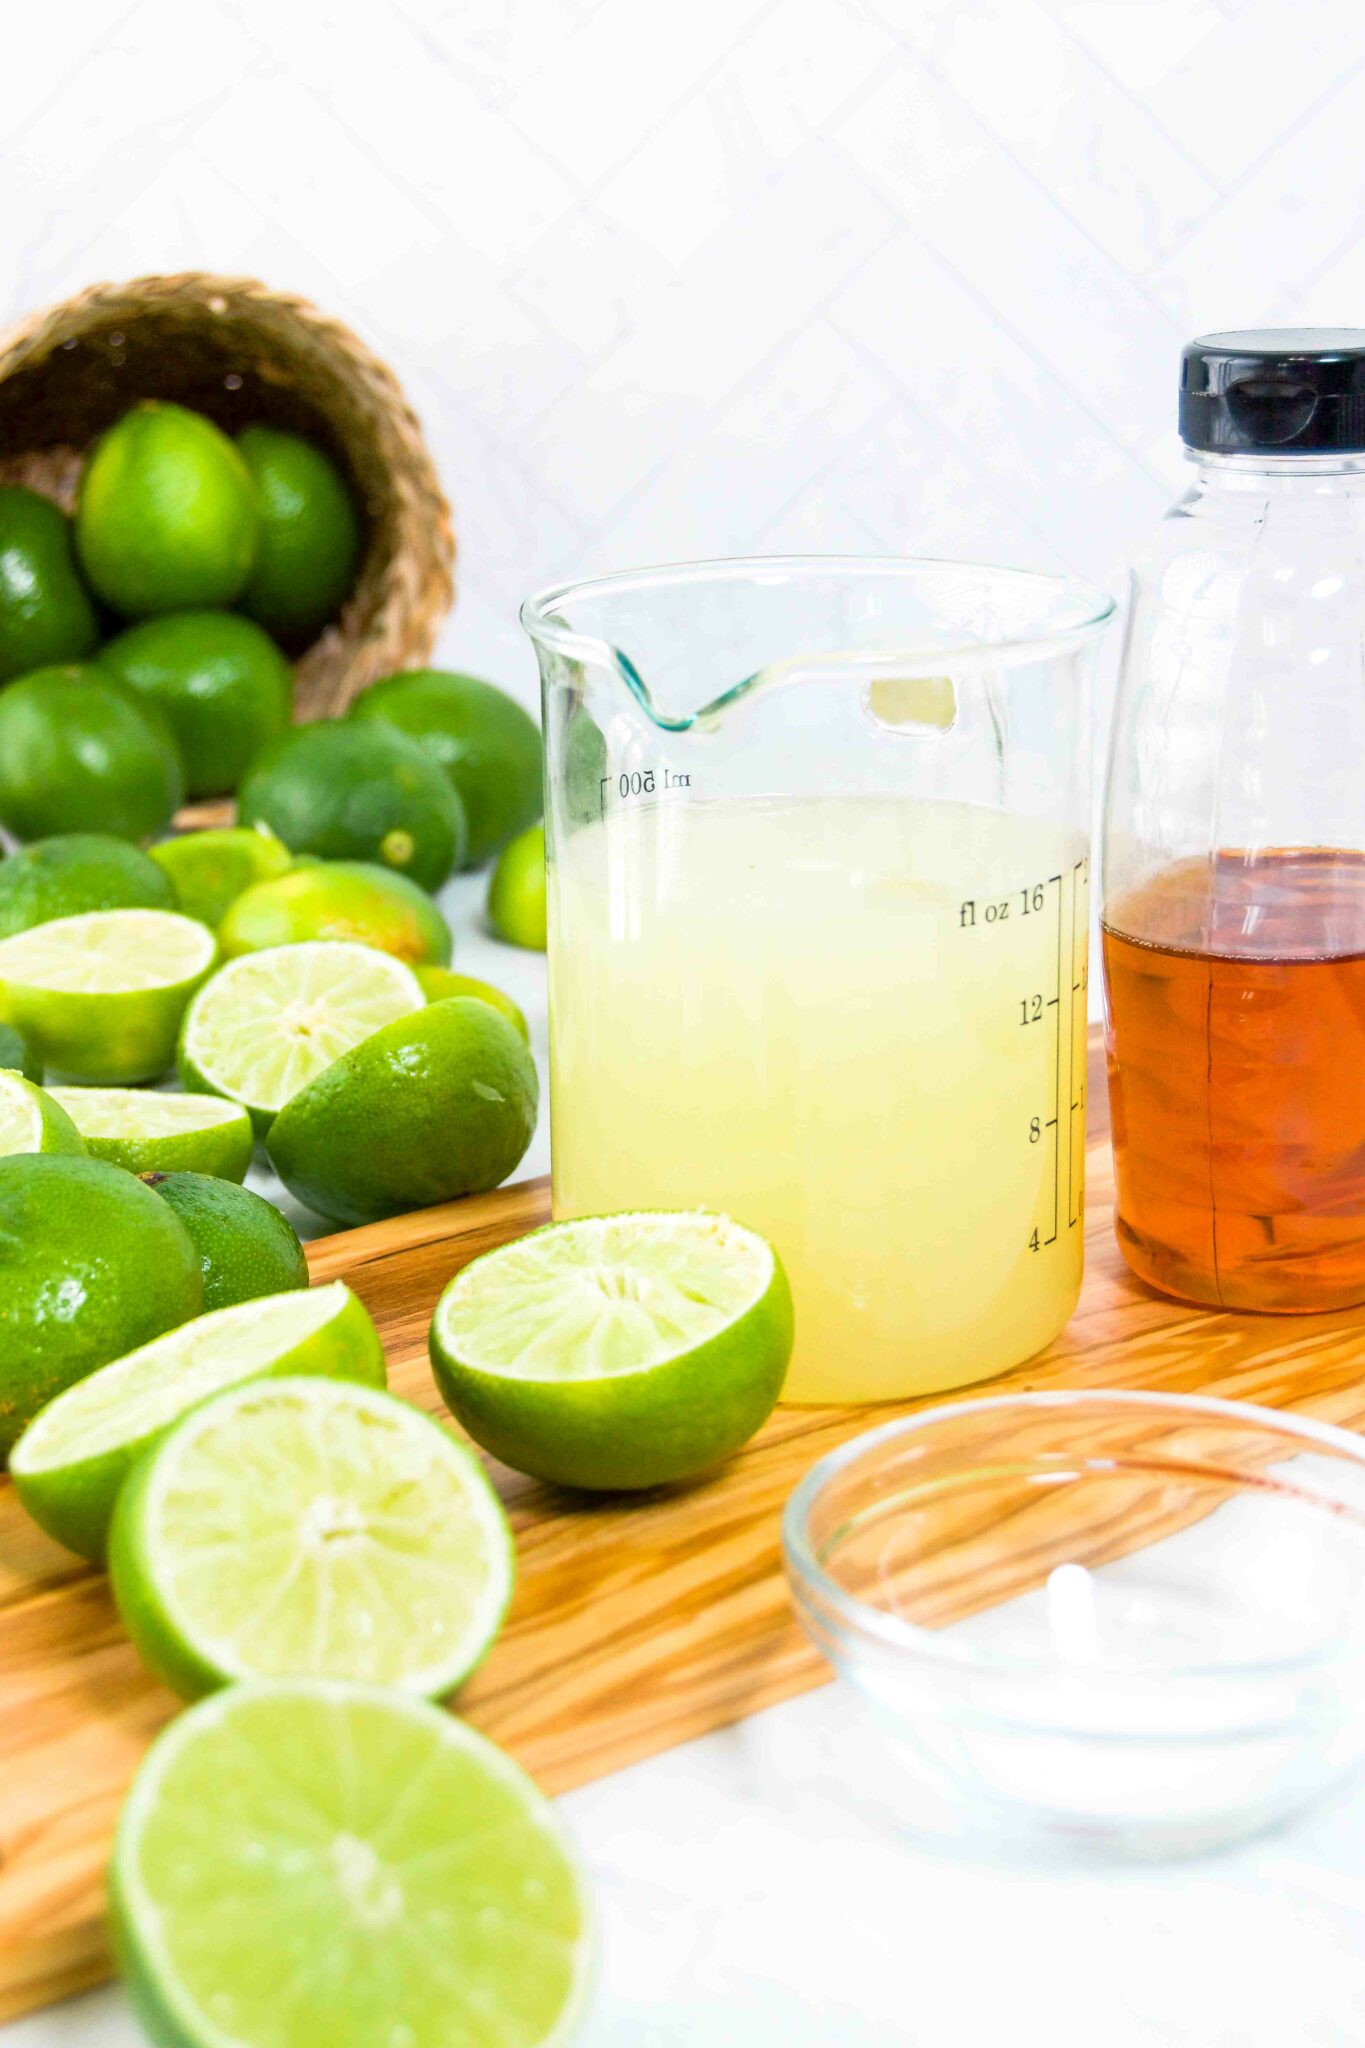 Pitcher Style Margaritas for a Crowd Recipe - Pinch of Yum